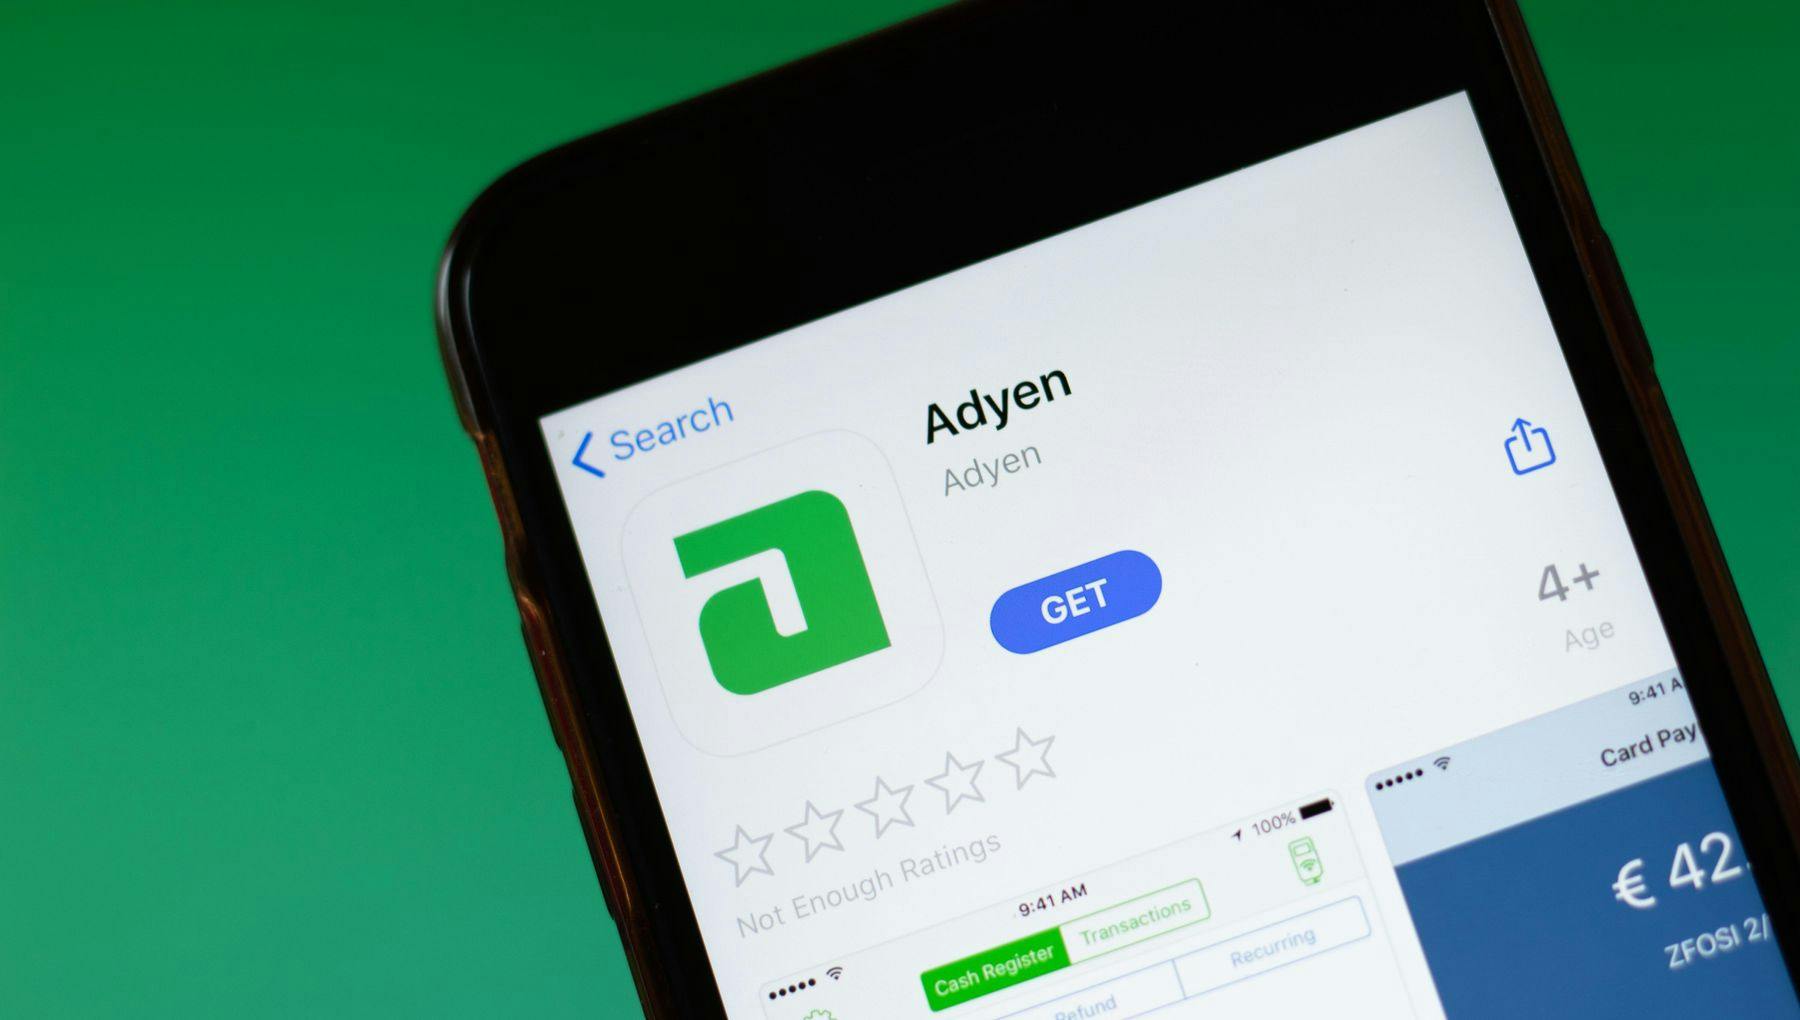 2BWM962 Moscow, Russia - 1 June 2020: Adyen app mobile logo close-up on screen display, Illustrative Editorial.